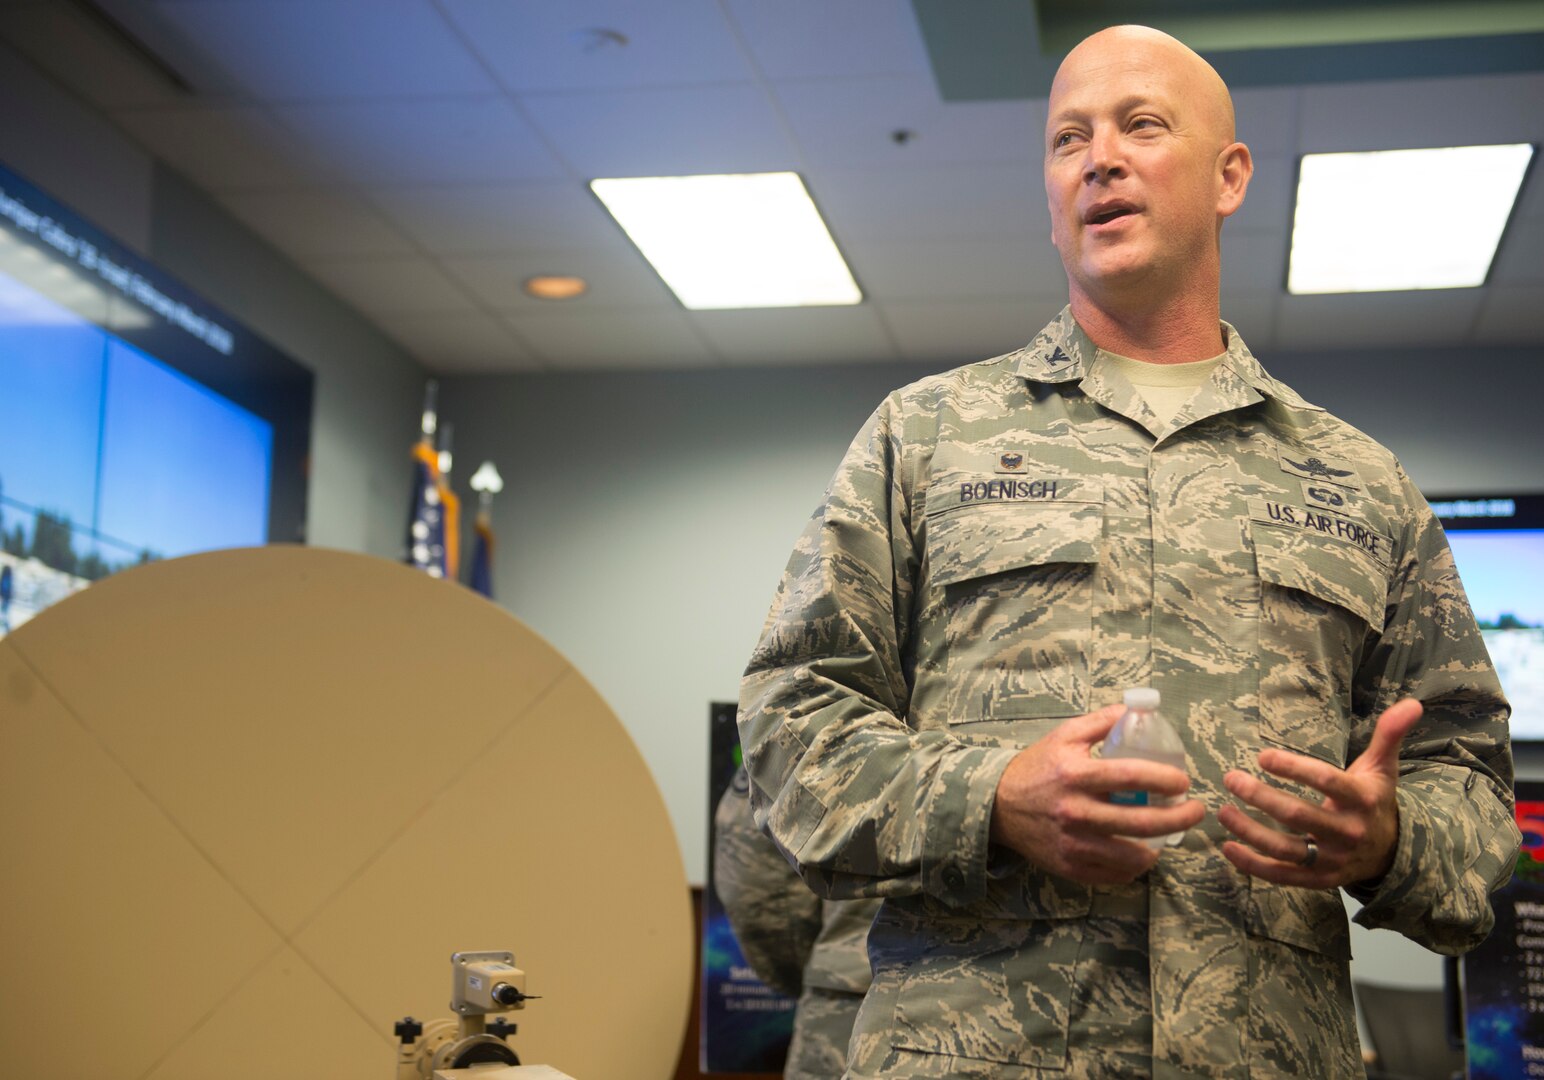 Col. Jeremy Boenisch, 5th Combat Communications Group commander, explains the 5th CCG’s mission for civic leaders during a tour at Joint Base San Antonio-Lackland, Texas, May 31, 2018. The civic leaders visited the base with Gen. Mike Holmes, commander Air Combat Command, to introduce them to 24th Air Force’s cyberspace mission and 25th AF’s intelligence, surveillance and reconnaissance mission. (U.S. Air Force photo by Tech. Sgt. R.J. Biermann)